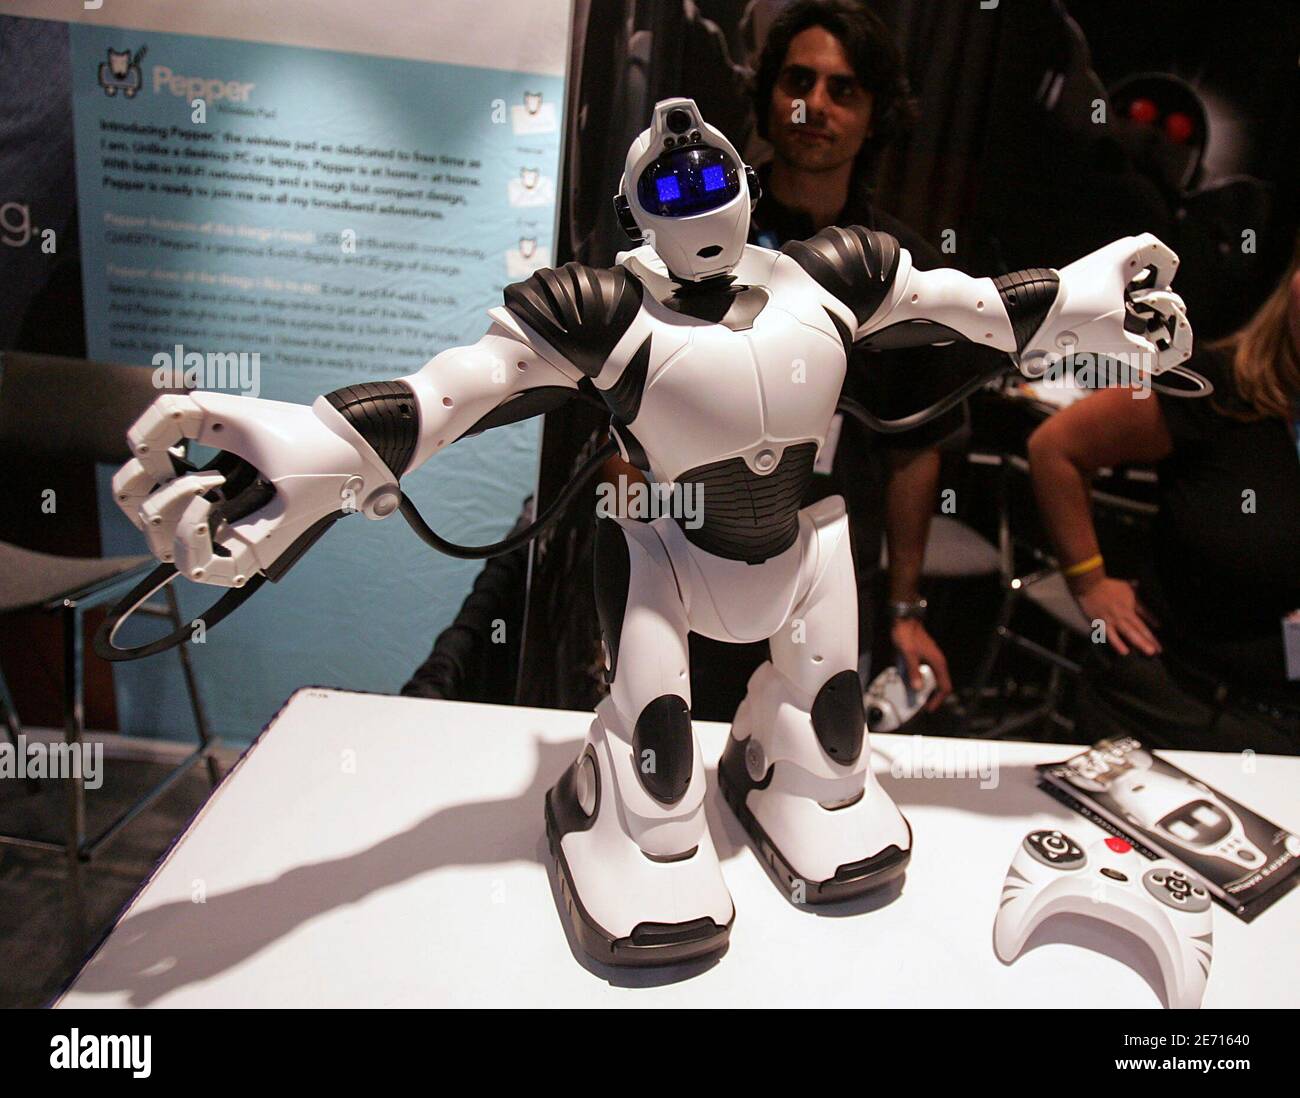 Robosapien" stretches after his nap at the DigitalLife showcase in New York  October 14, 2005. The small robot, made by WowWee, has a remote control and  sensors that not only allow it